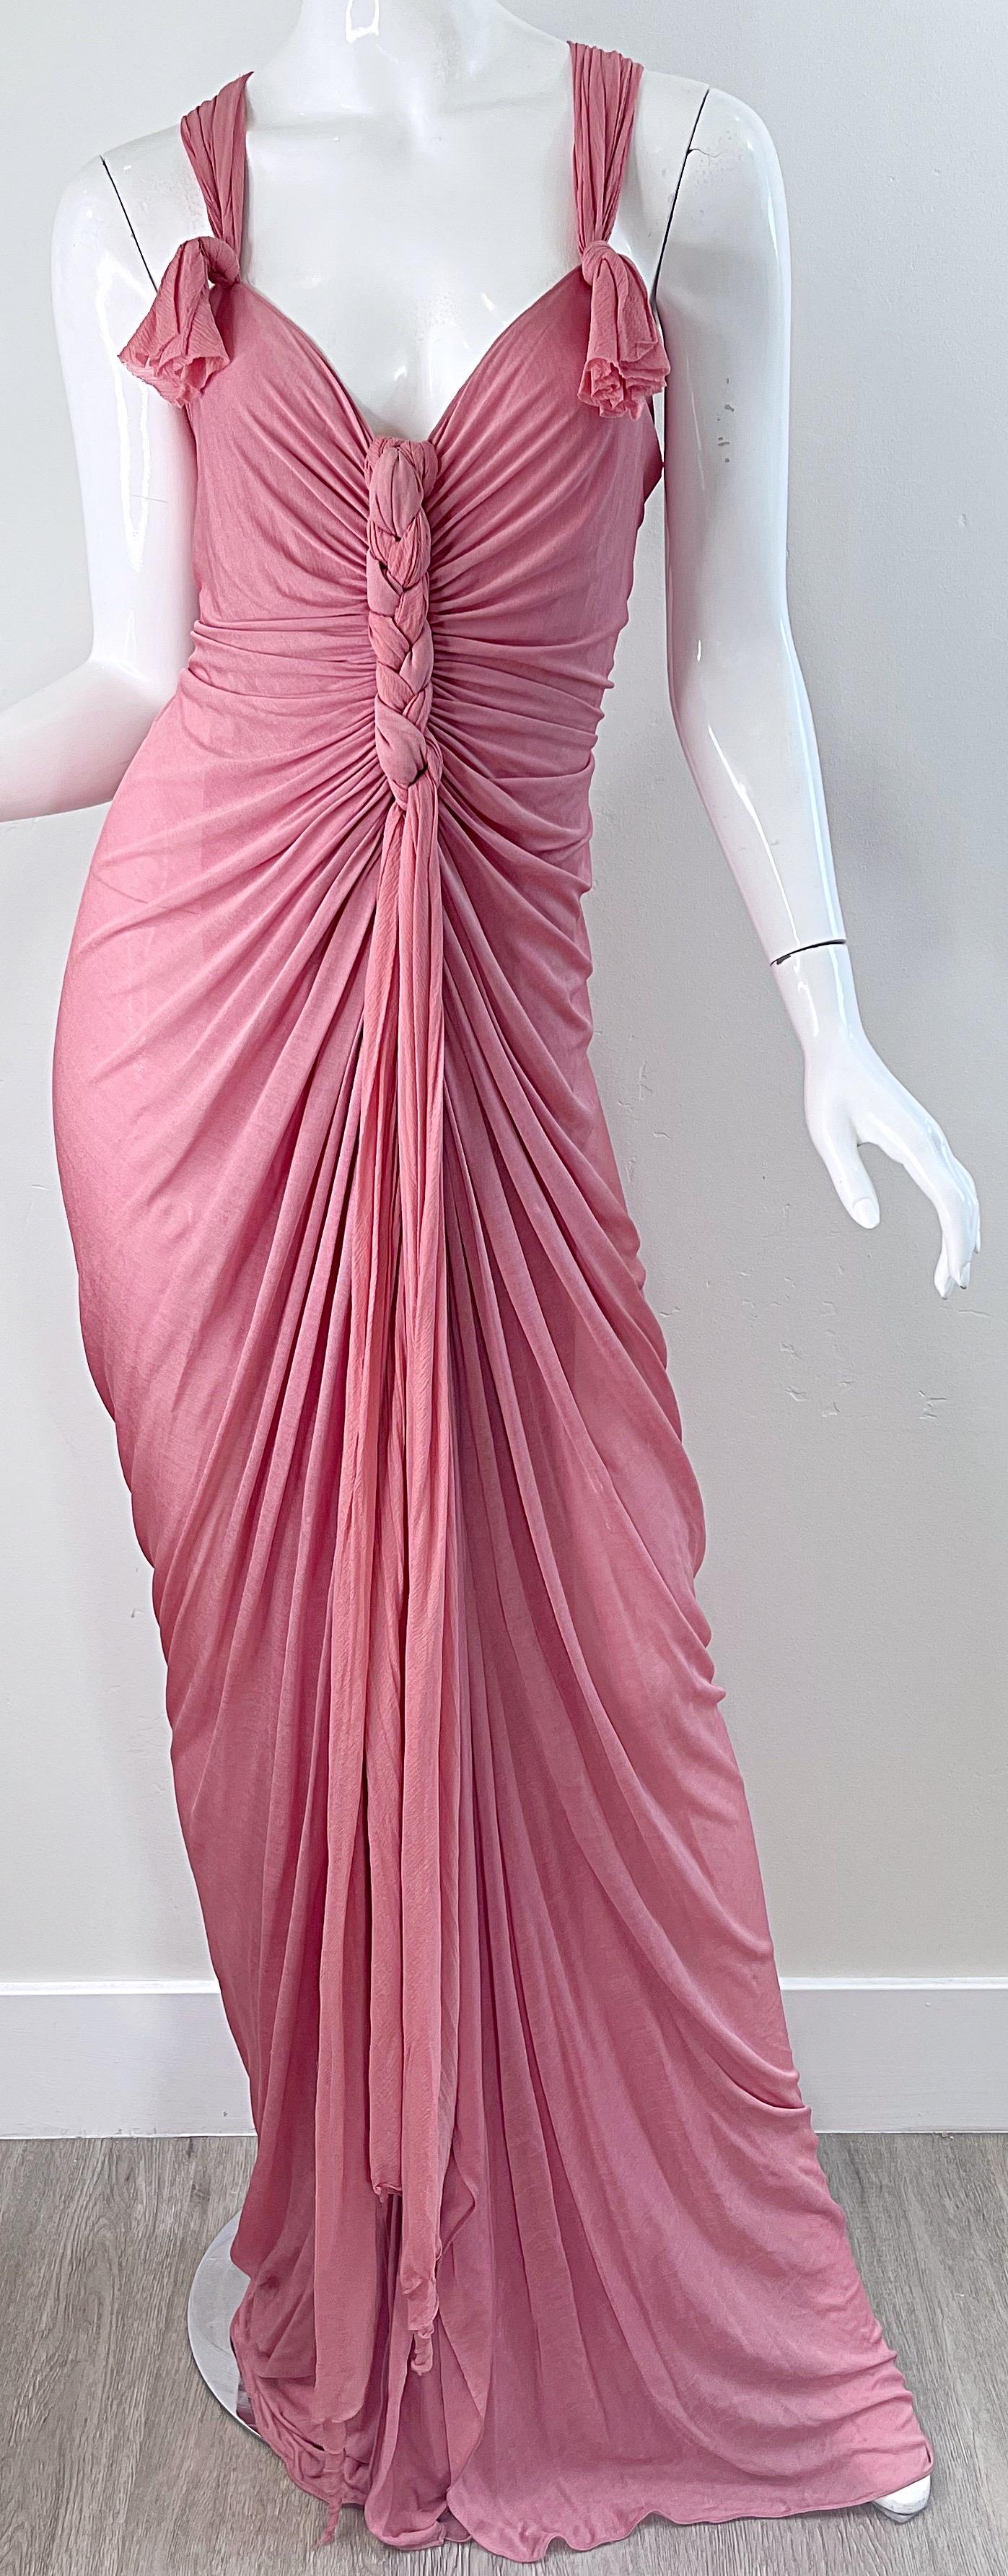 NWT Donna Karan Fall 2005 Pink Dusty Rose Mauve 30s Style Semi Sheer Gown Dress For Sale 7